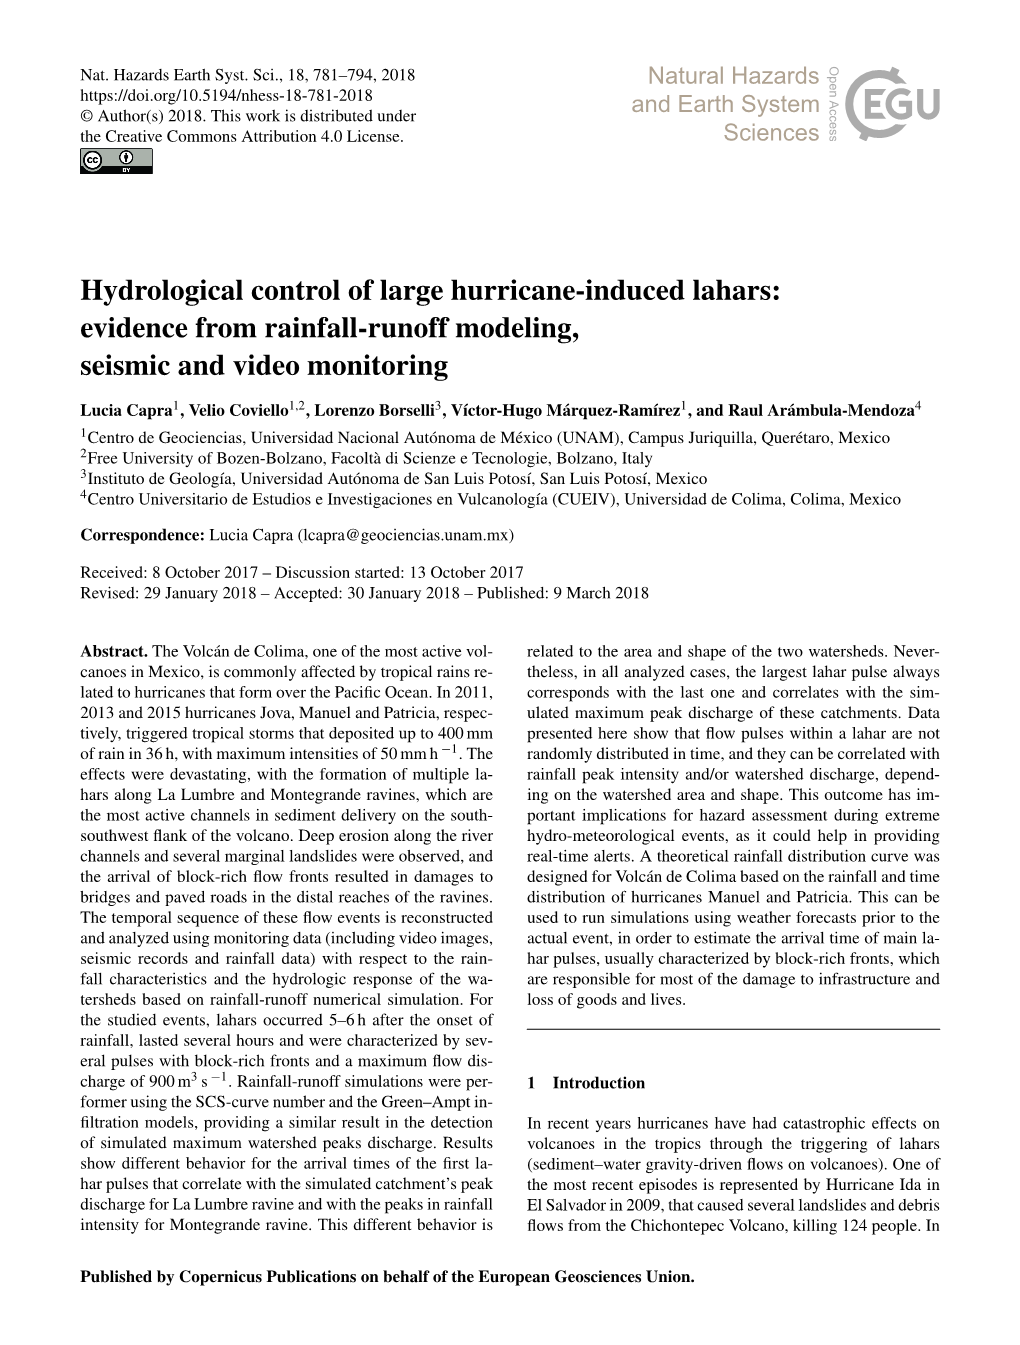 Hydrological Control of Large Hurricane-Induced Lahars: Evidence from Rainfall-Runoff Modeling, Seismic and Video Monitoring